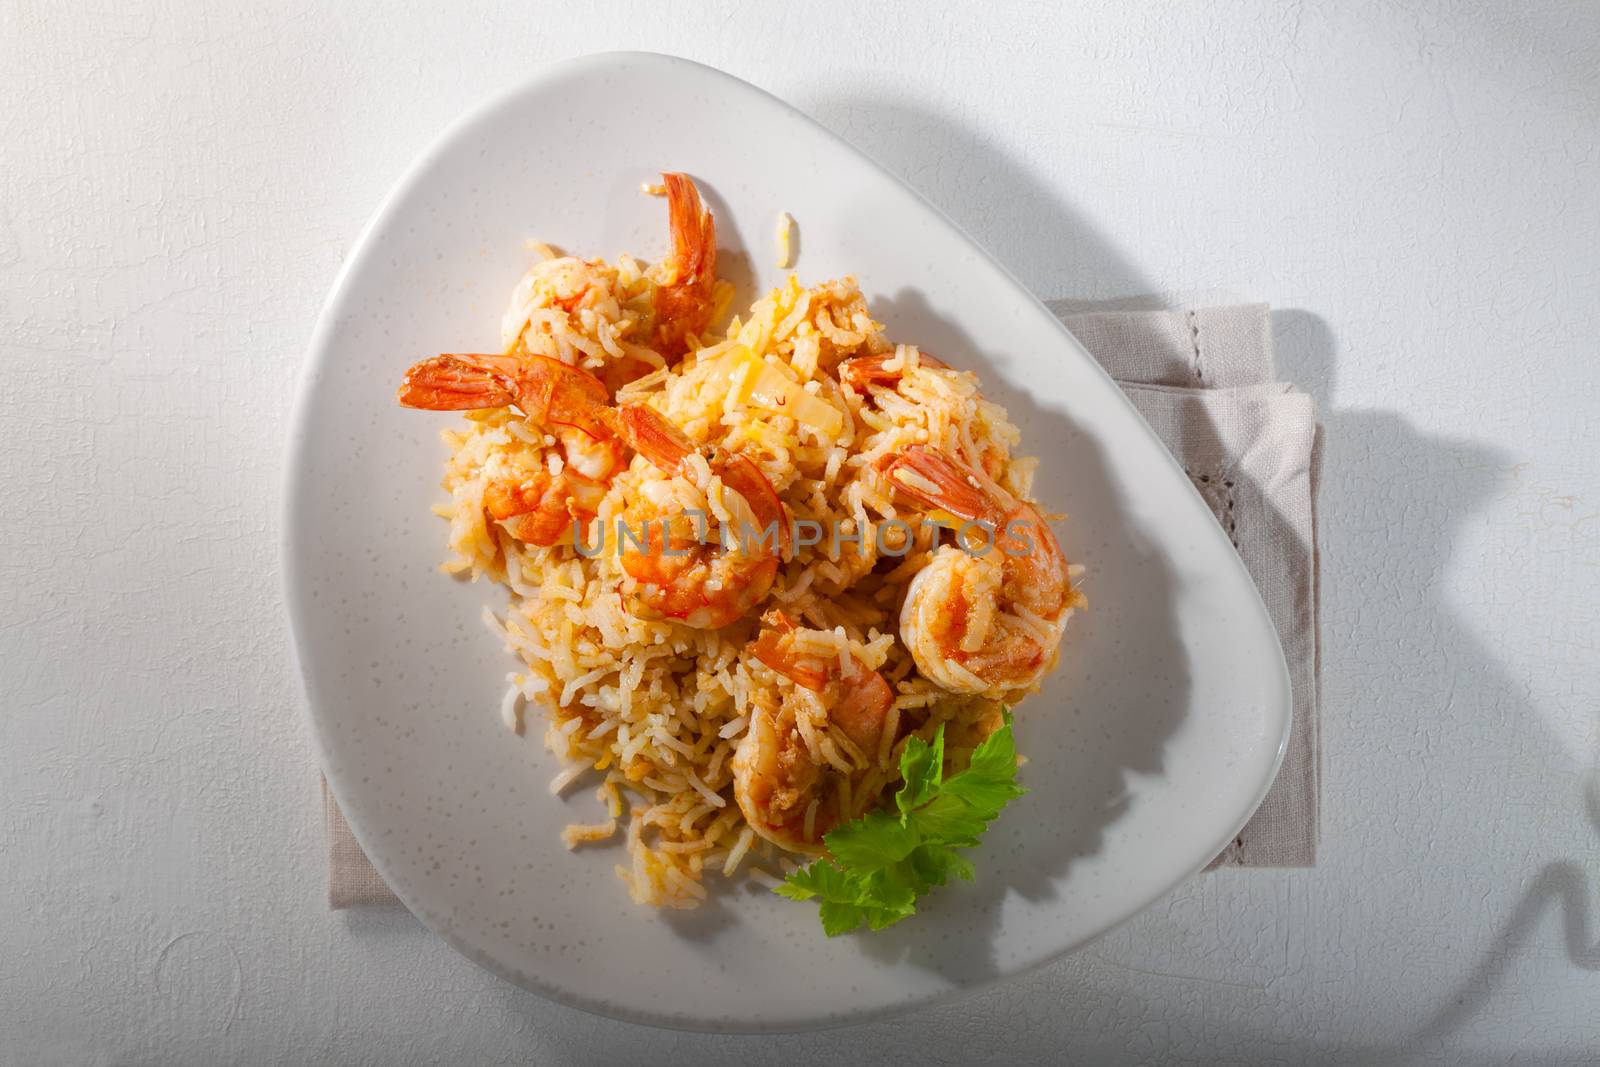 Bowl of fried rice with shrimps and greenery